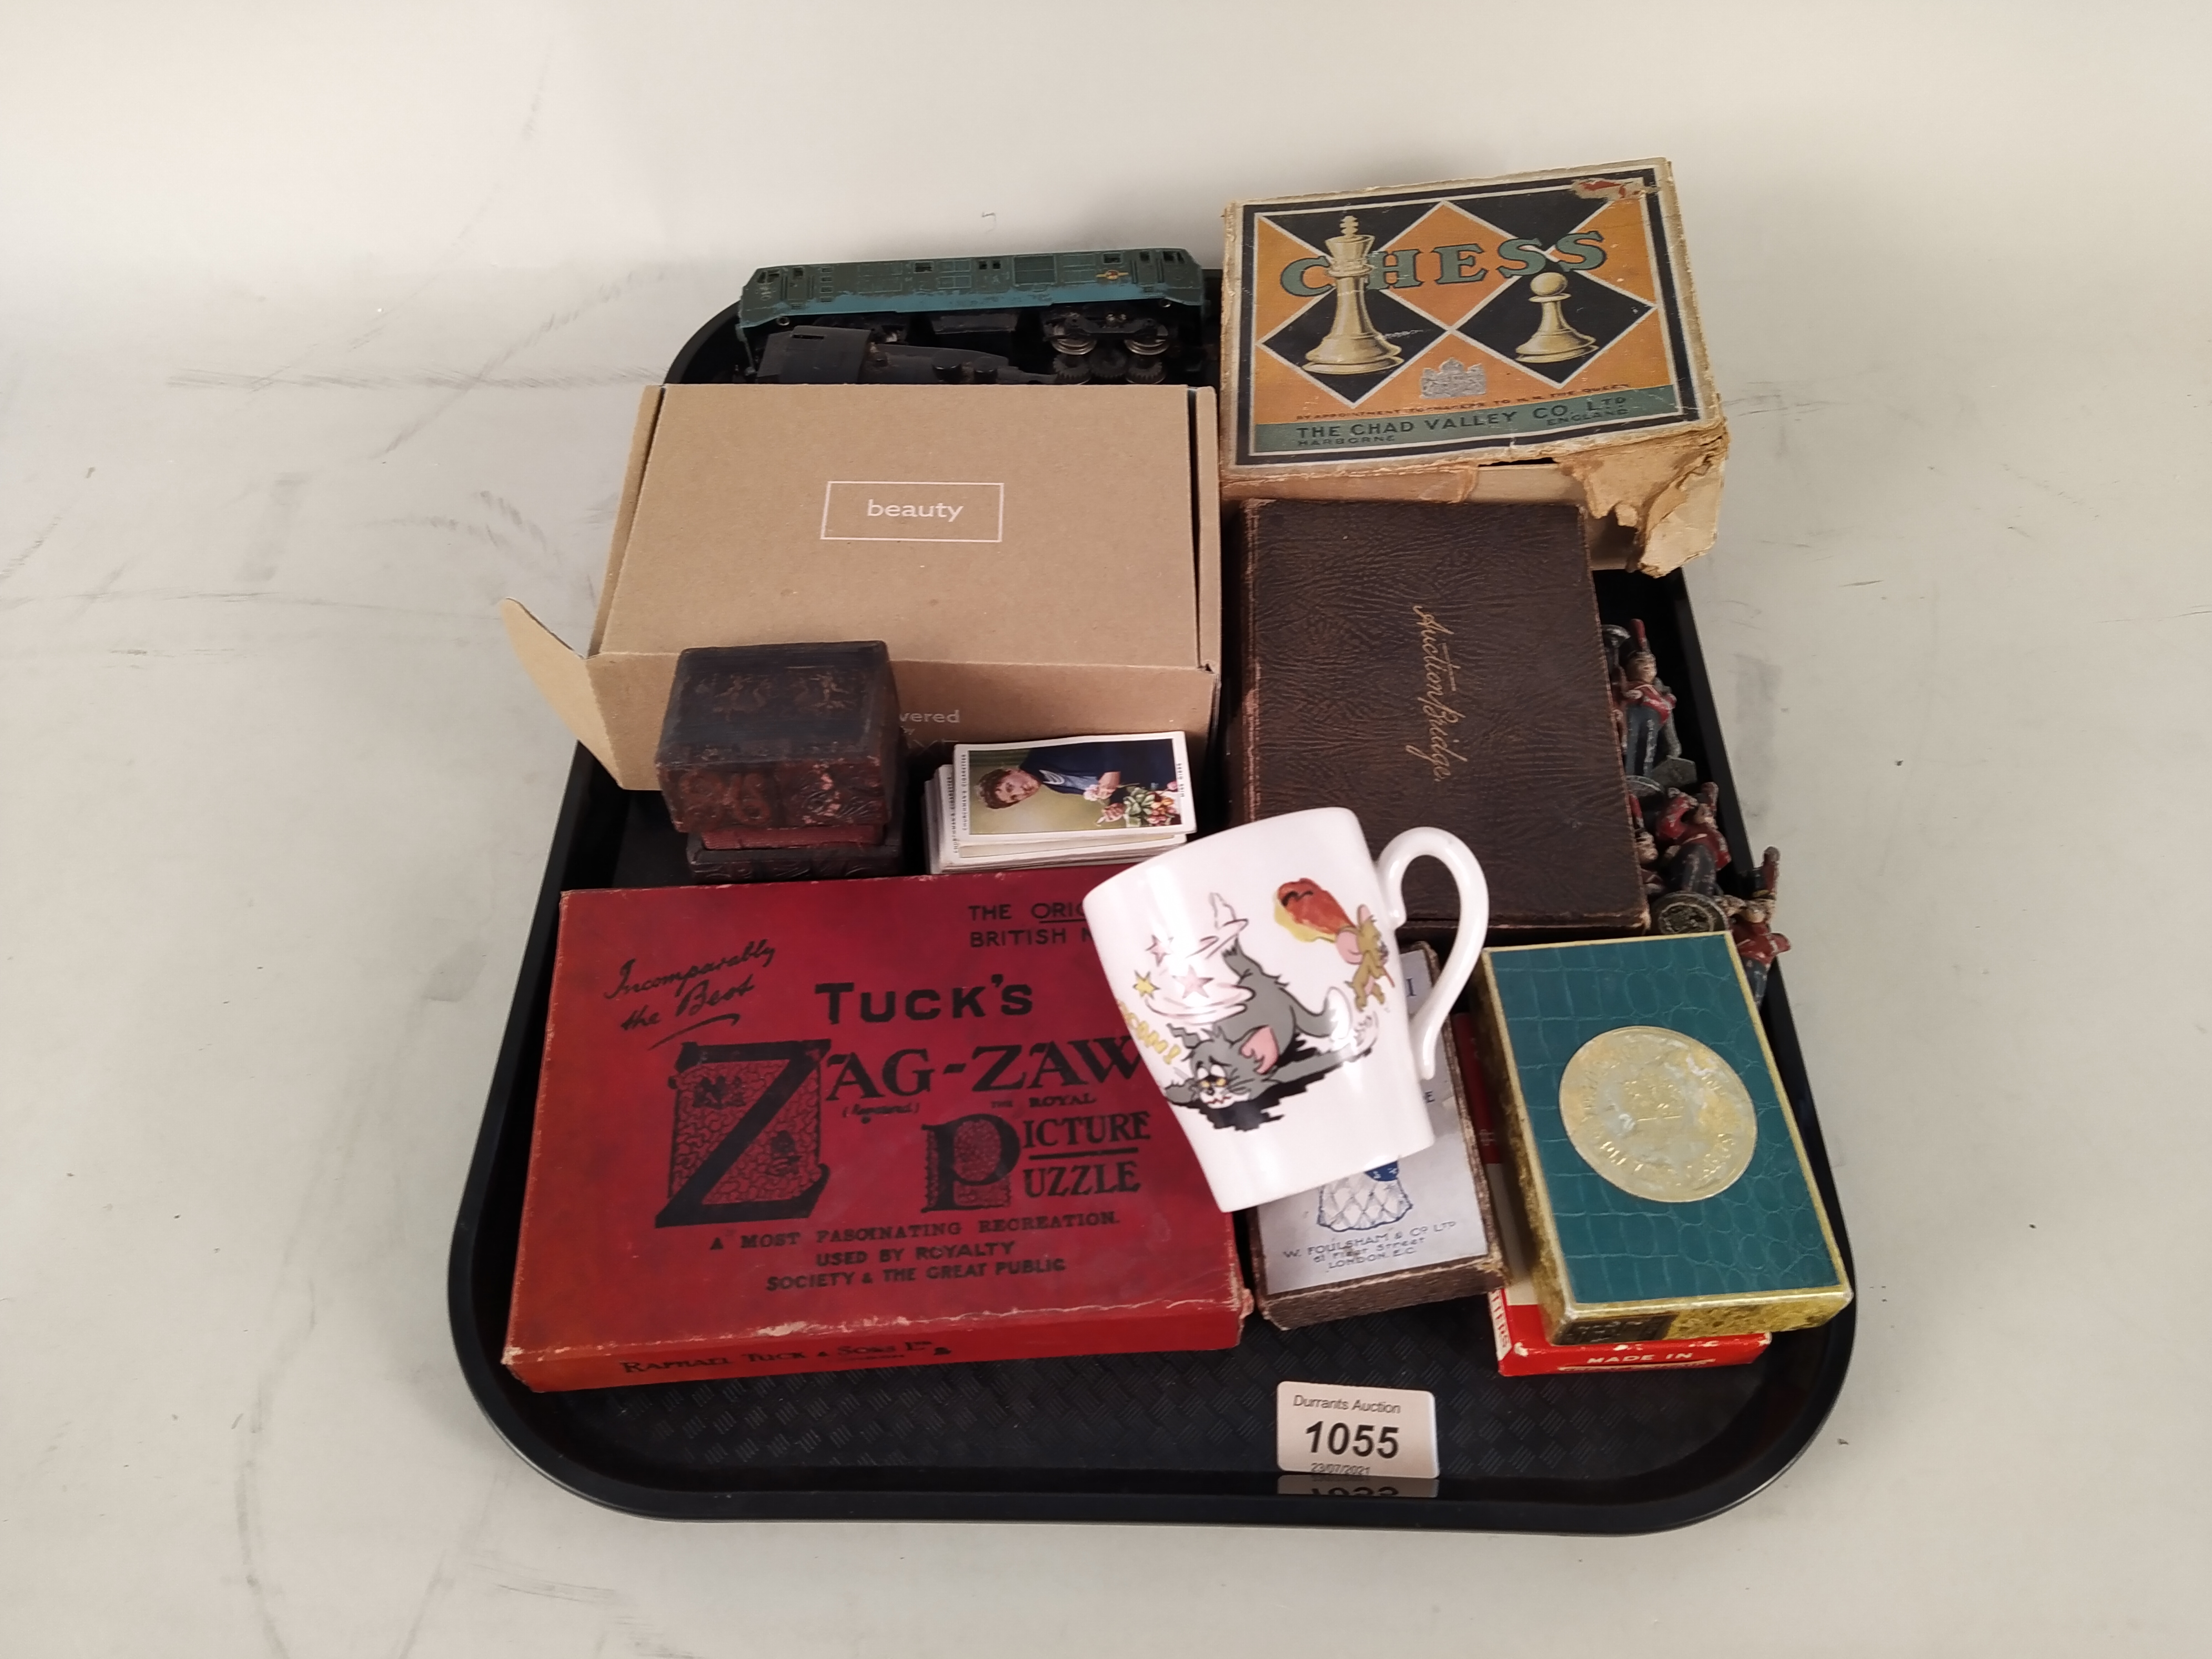 A Tucks 'Zag-Zaw' picture puzzle, vintage playing cards and chess set, - Image 3 of 3